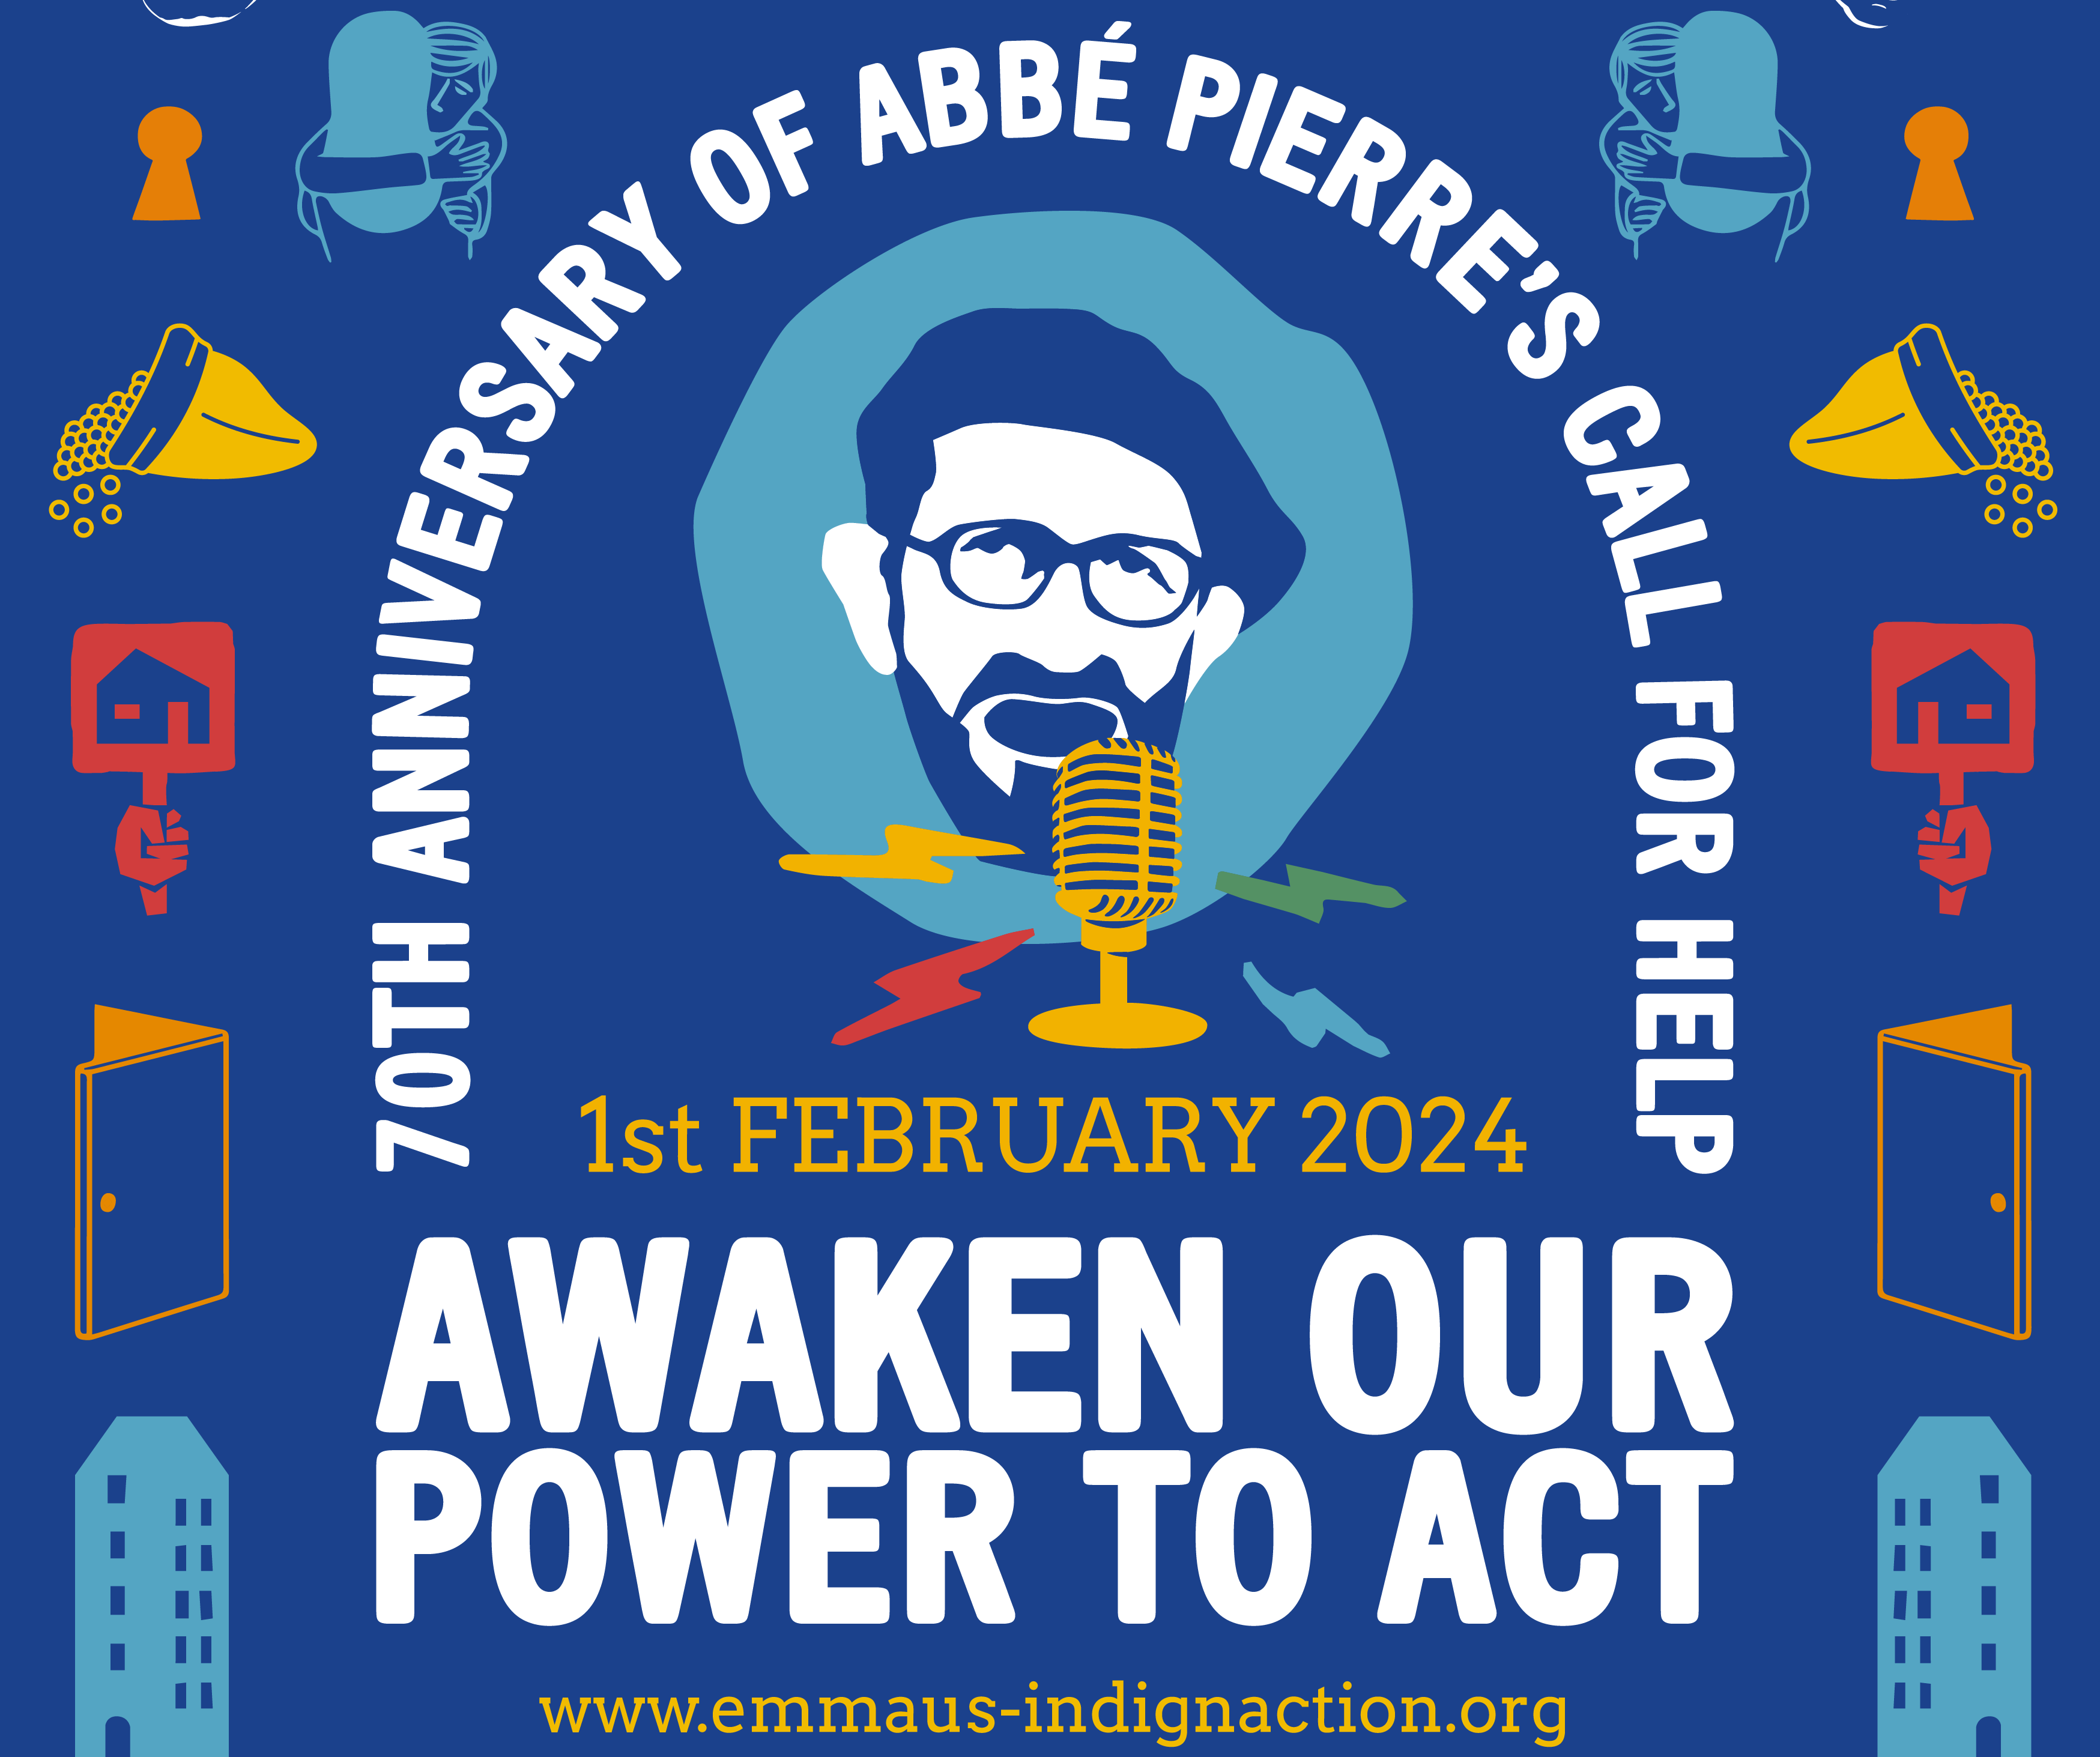 70th anniversary of abbé Pierre's call for help